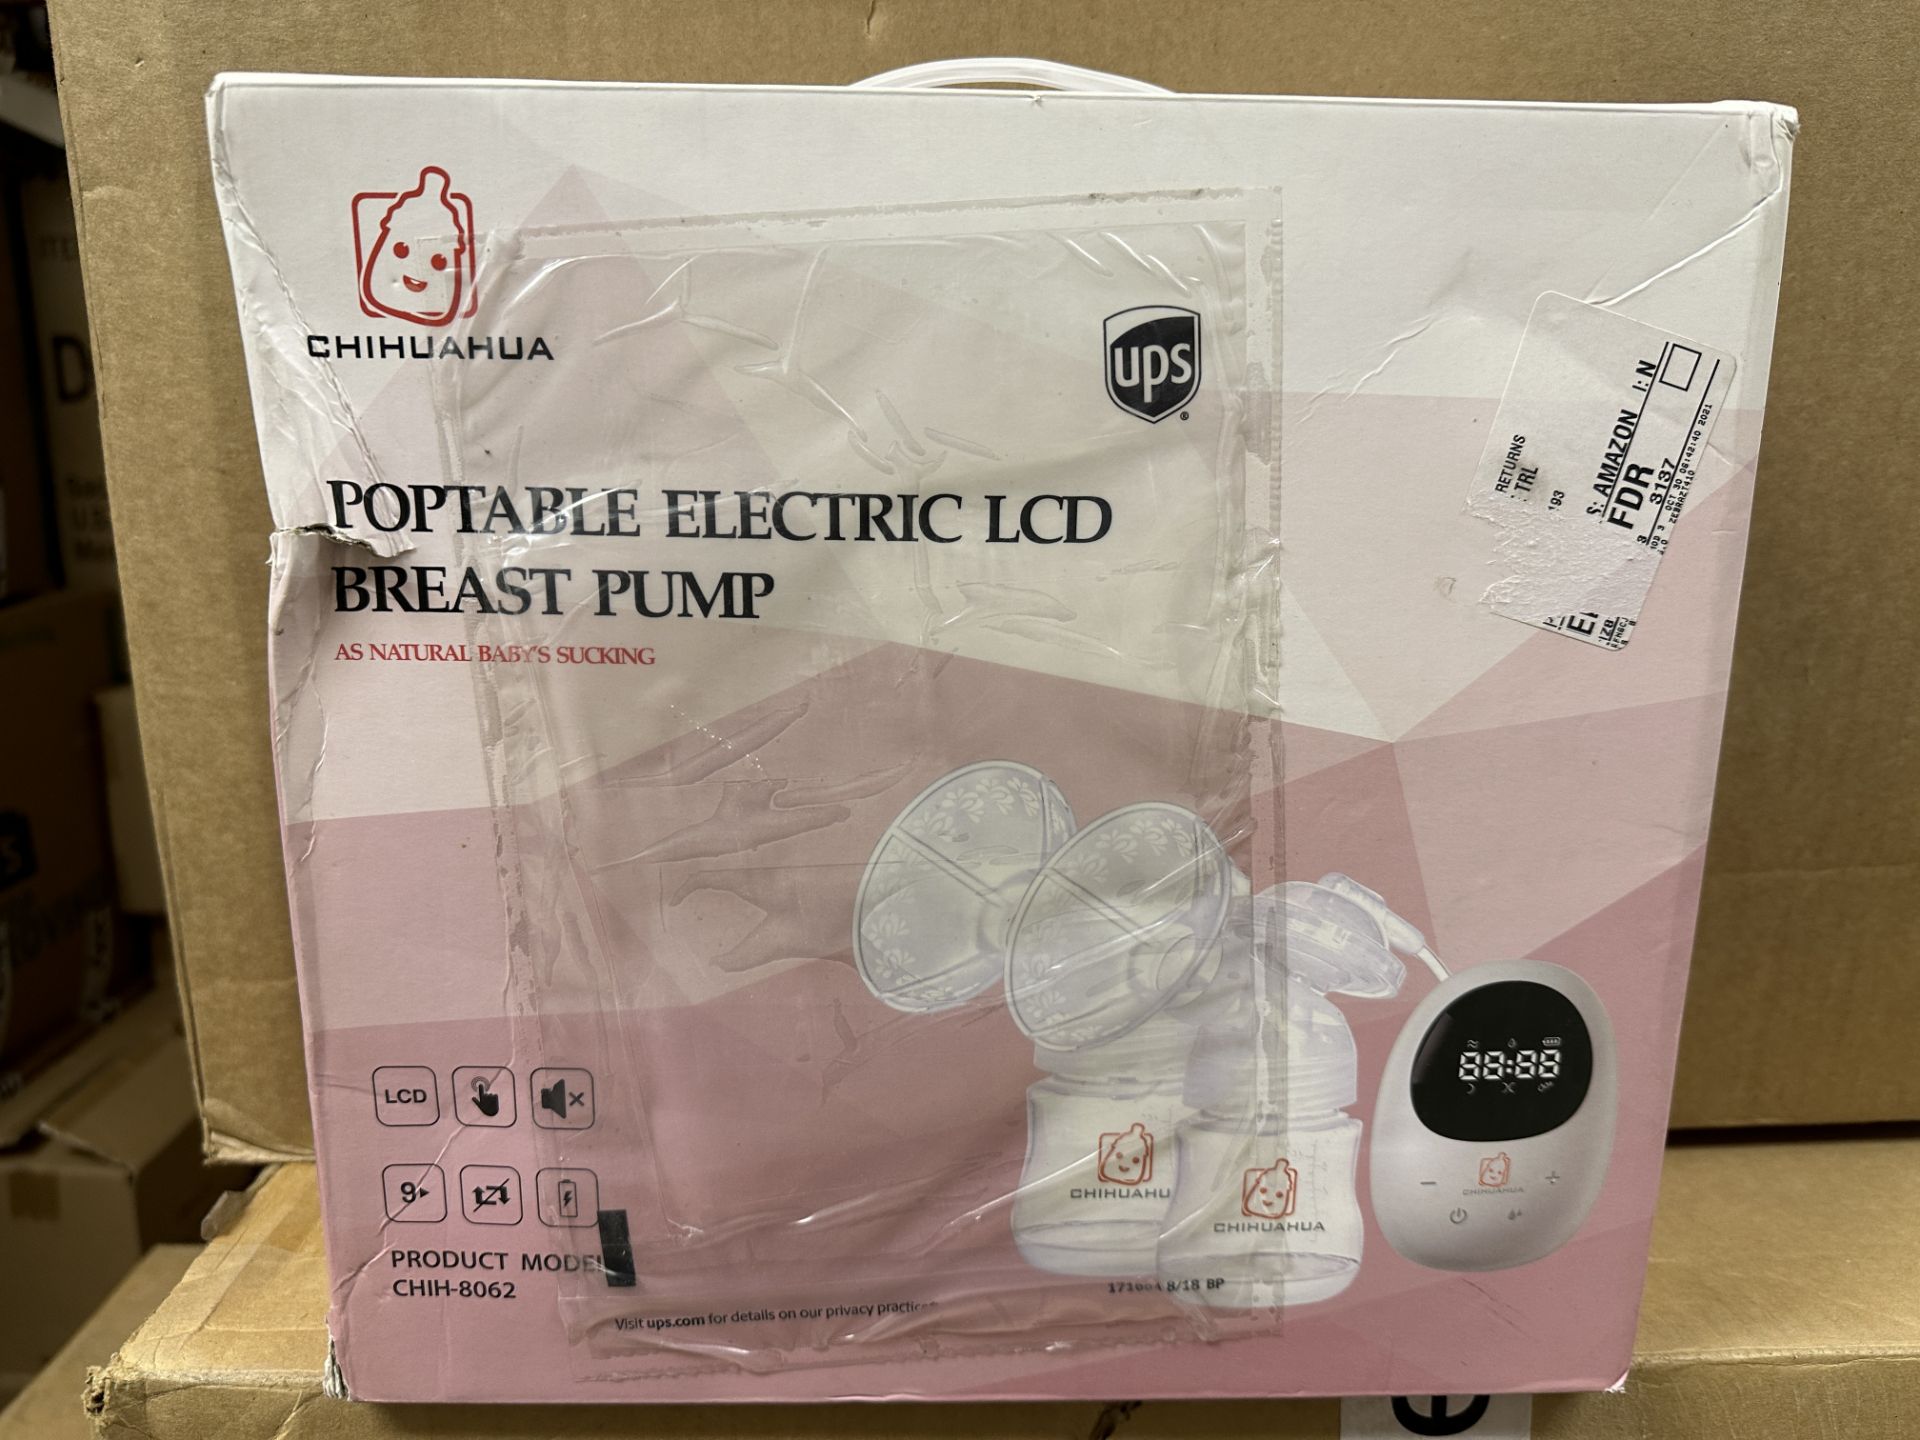 Chihuahua Popable Electric LCD Breast Pump in Box - Image 3 of 3